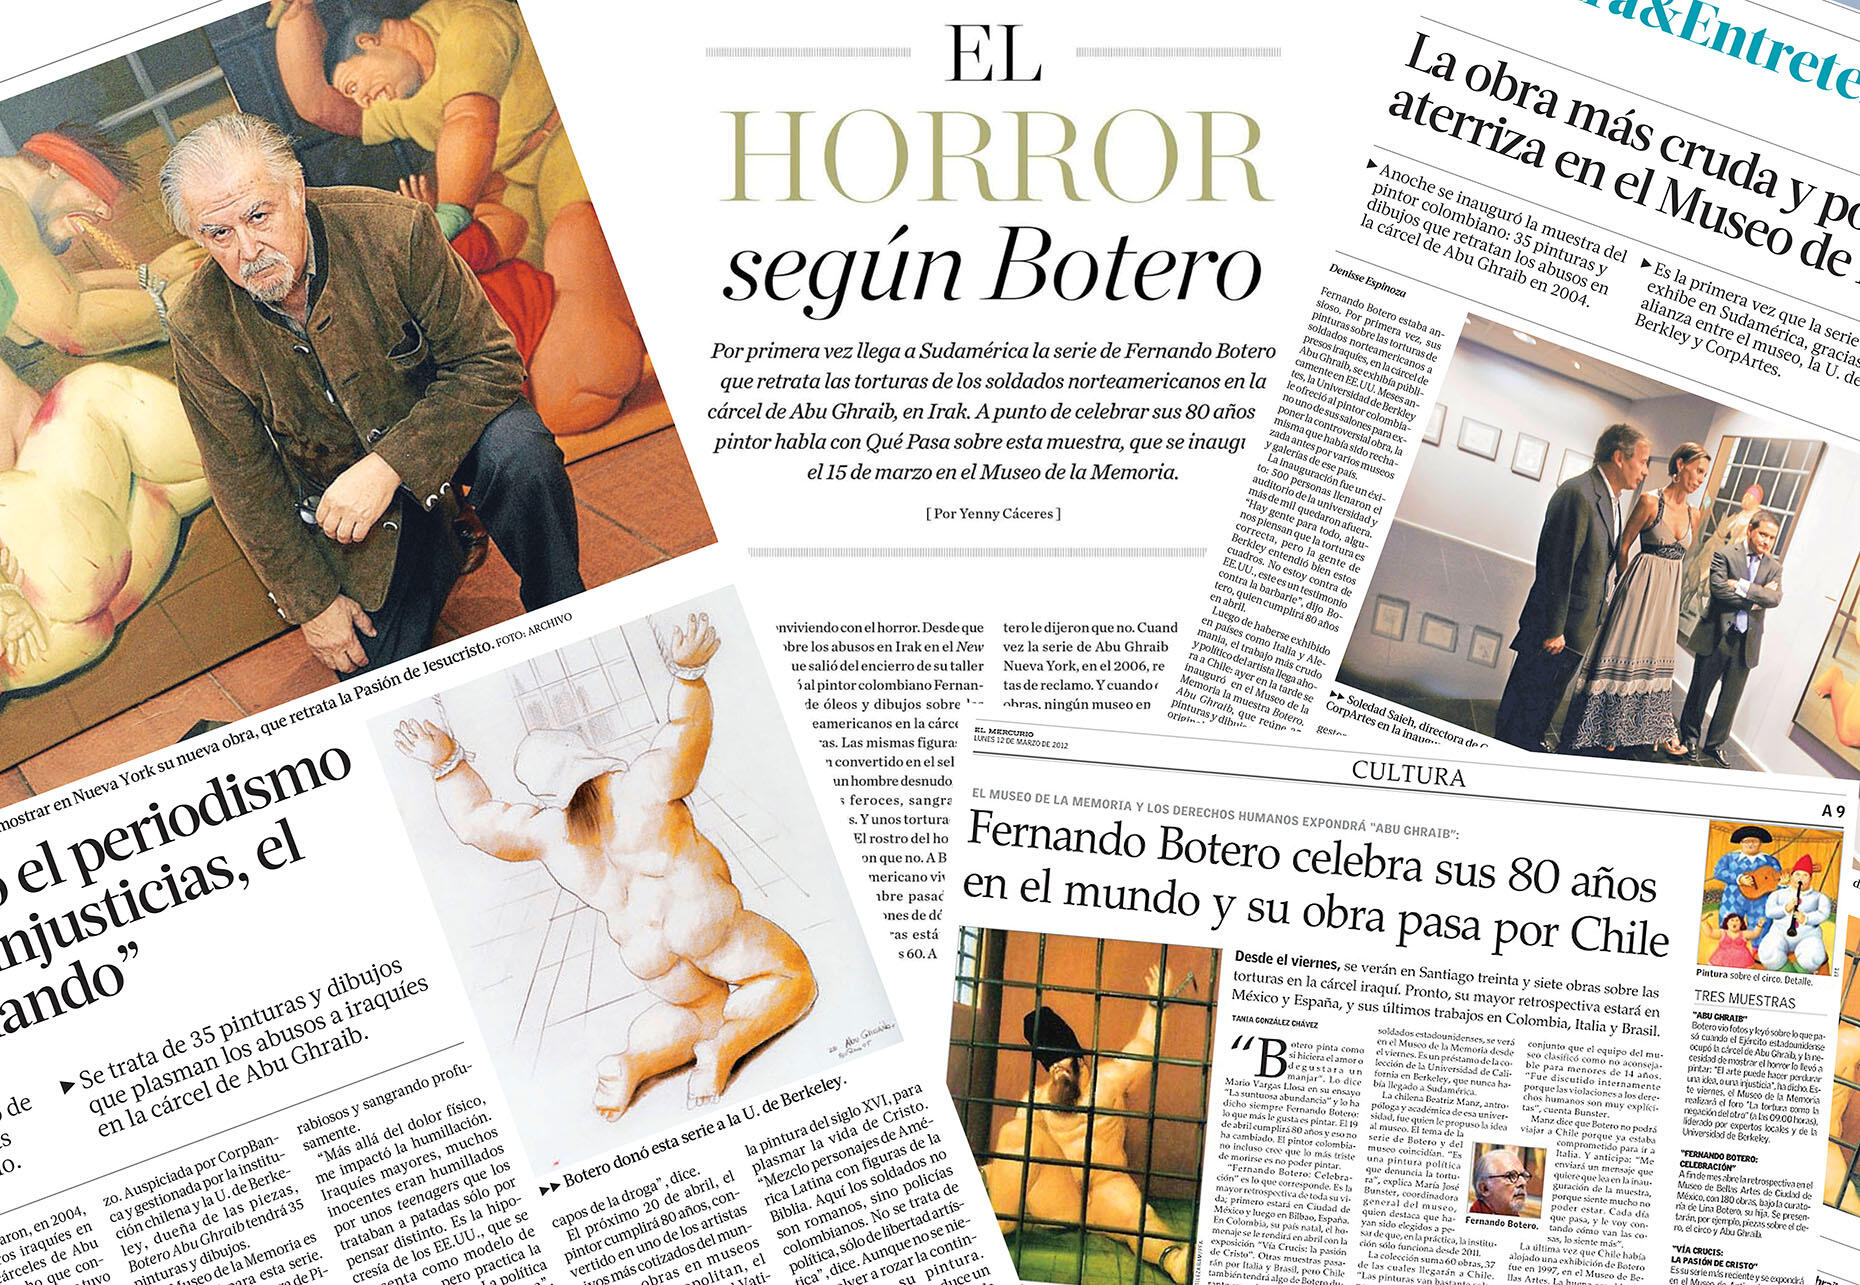 Images of newspaper and website accounts of the Botero exhibit at Chile’s Museo de la Memoria. (Image by CLAS.)